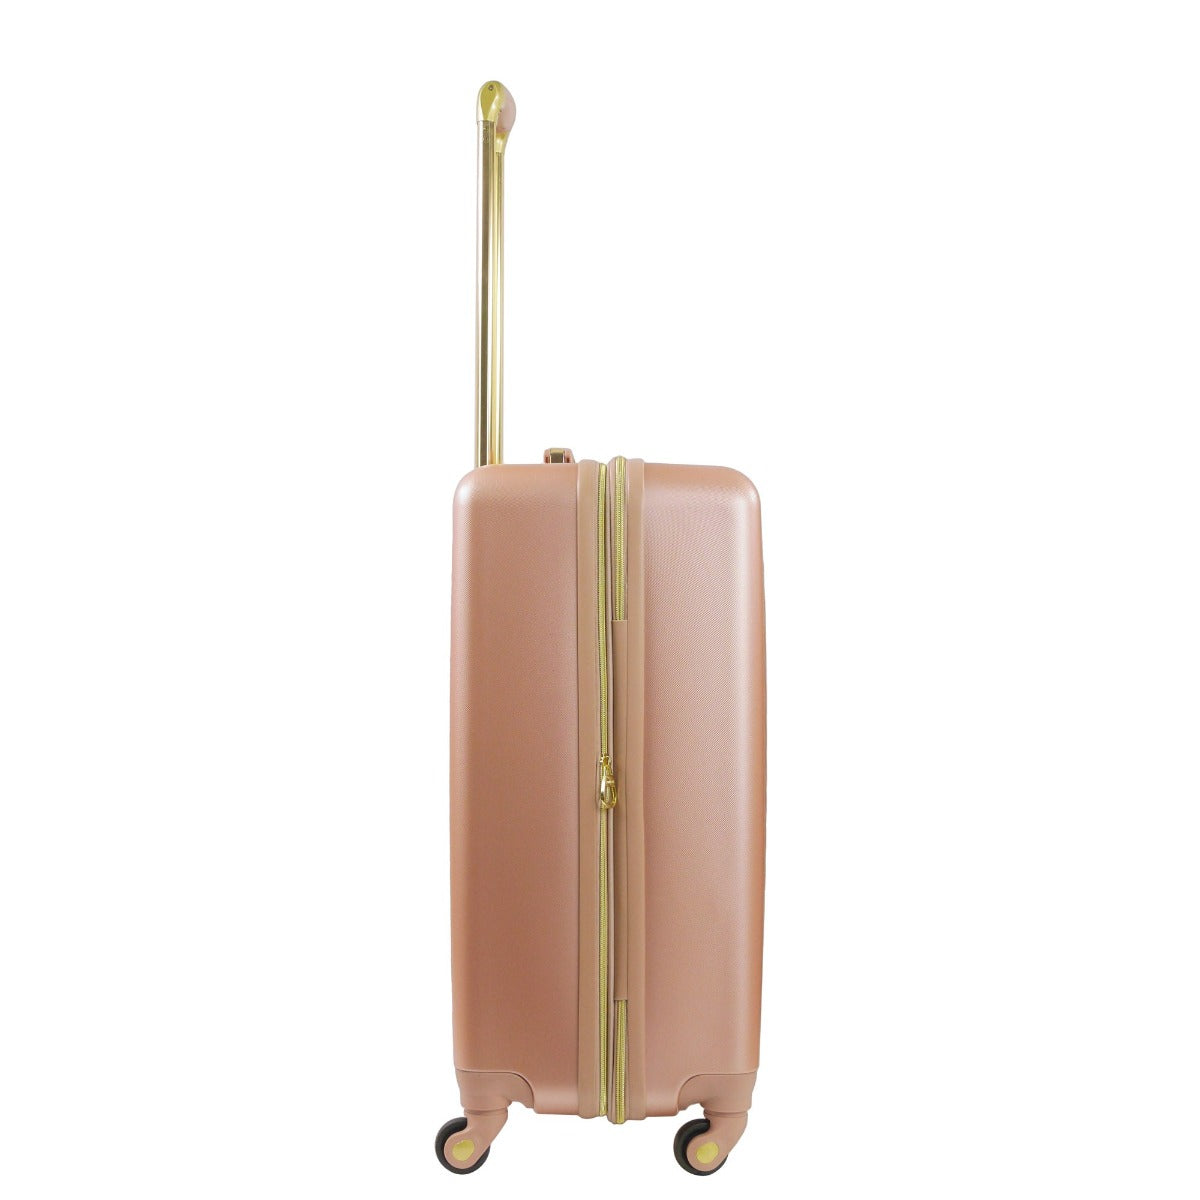 Christian Siriano Addie 25" checked luggage hardside spinner suitcase rose gold - best travelling suitcases